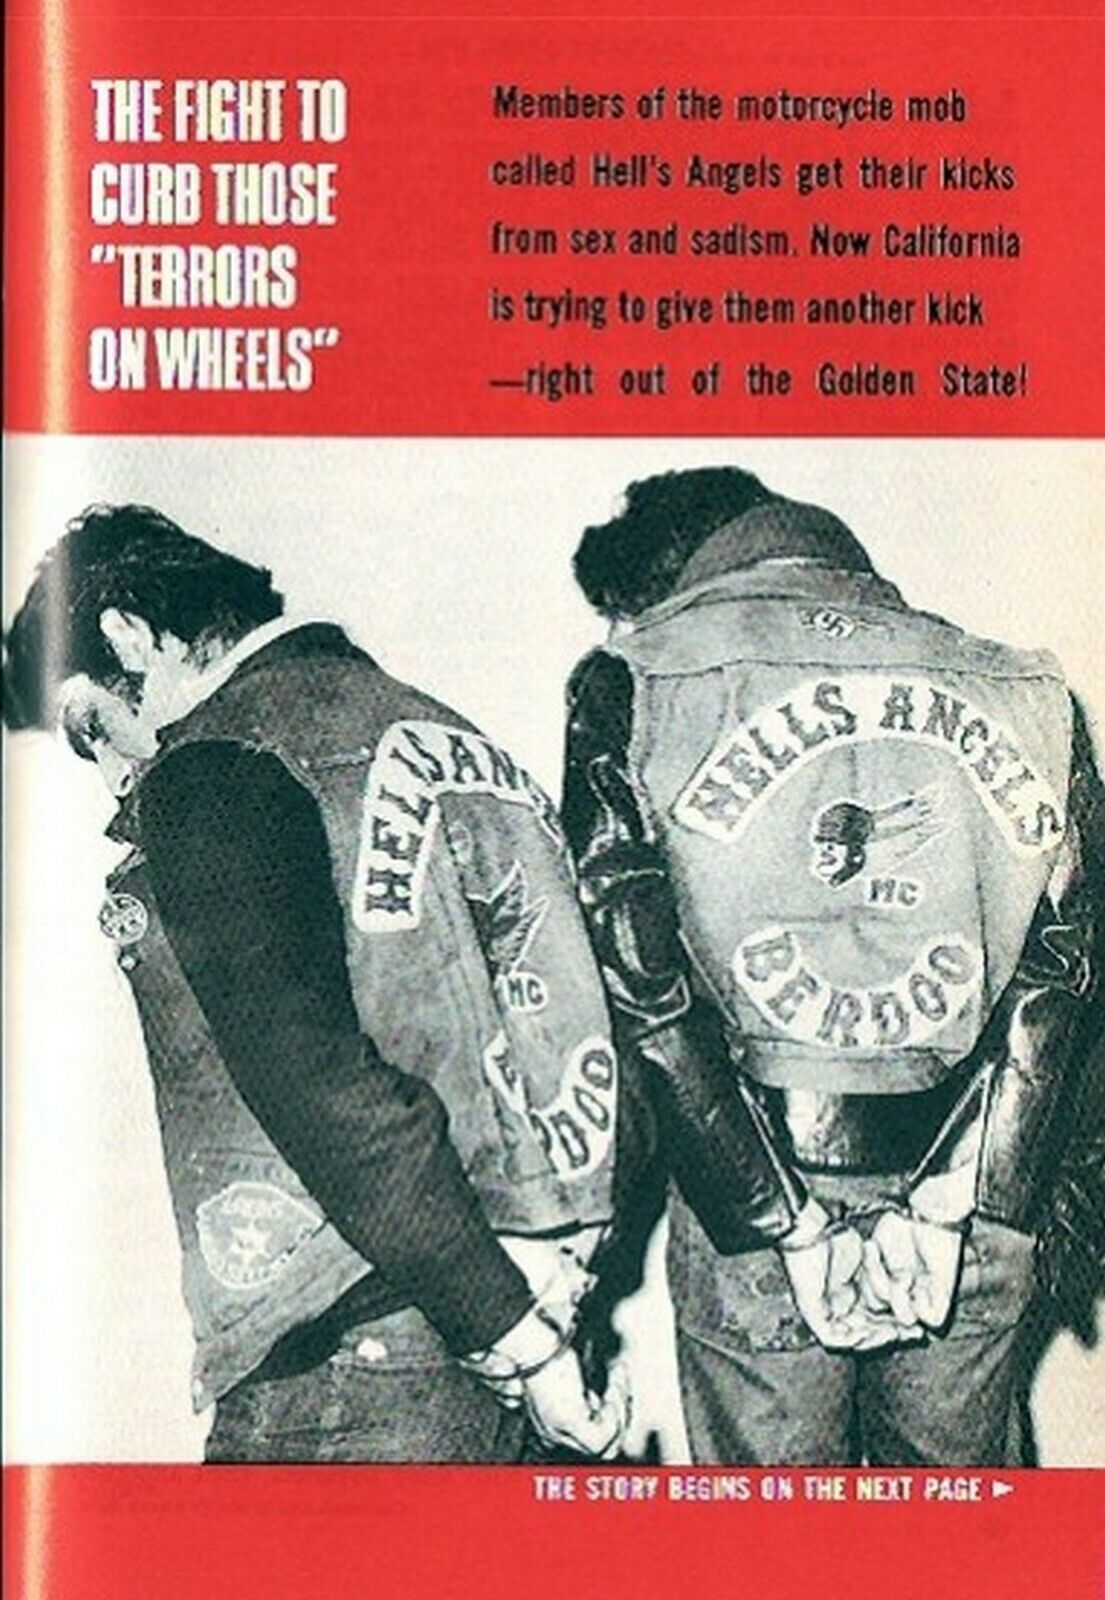 Hell’s Angels 1966 Terror On Wheels Motorcycle Club Pictorial California Trouble